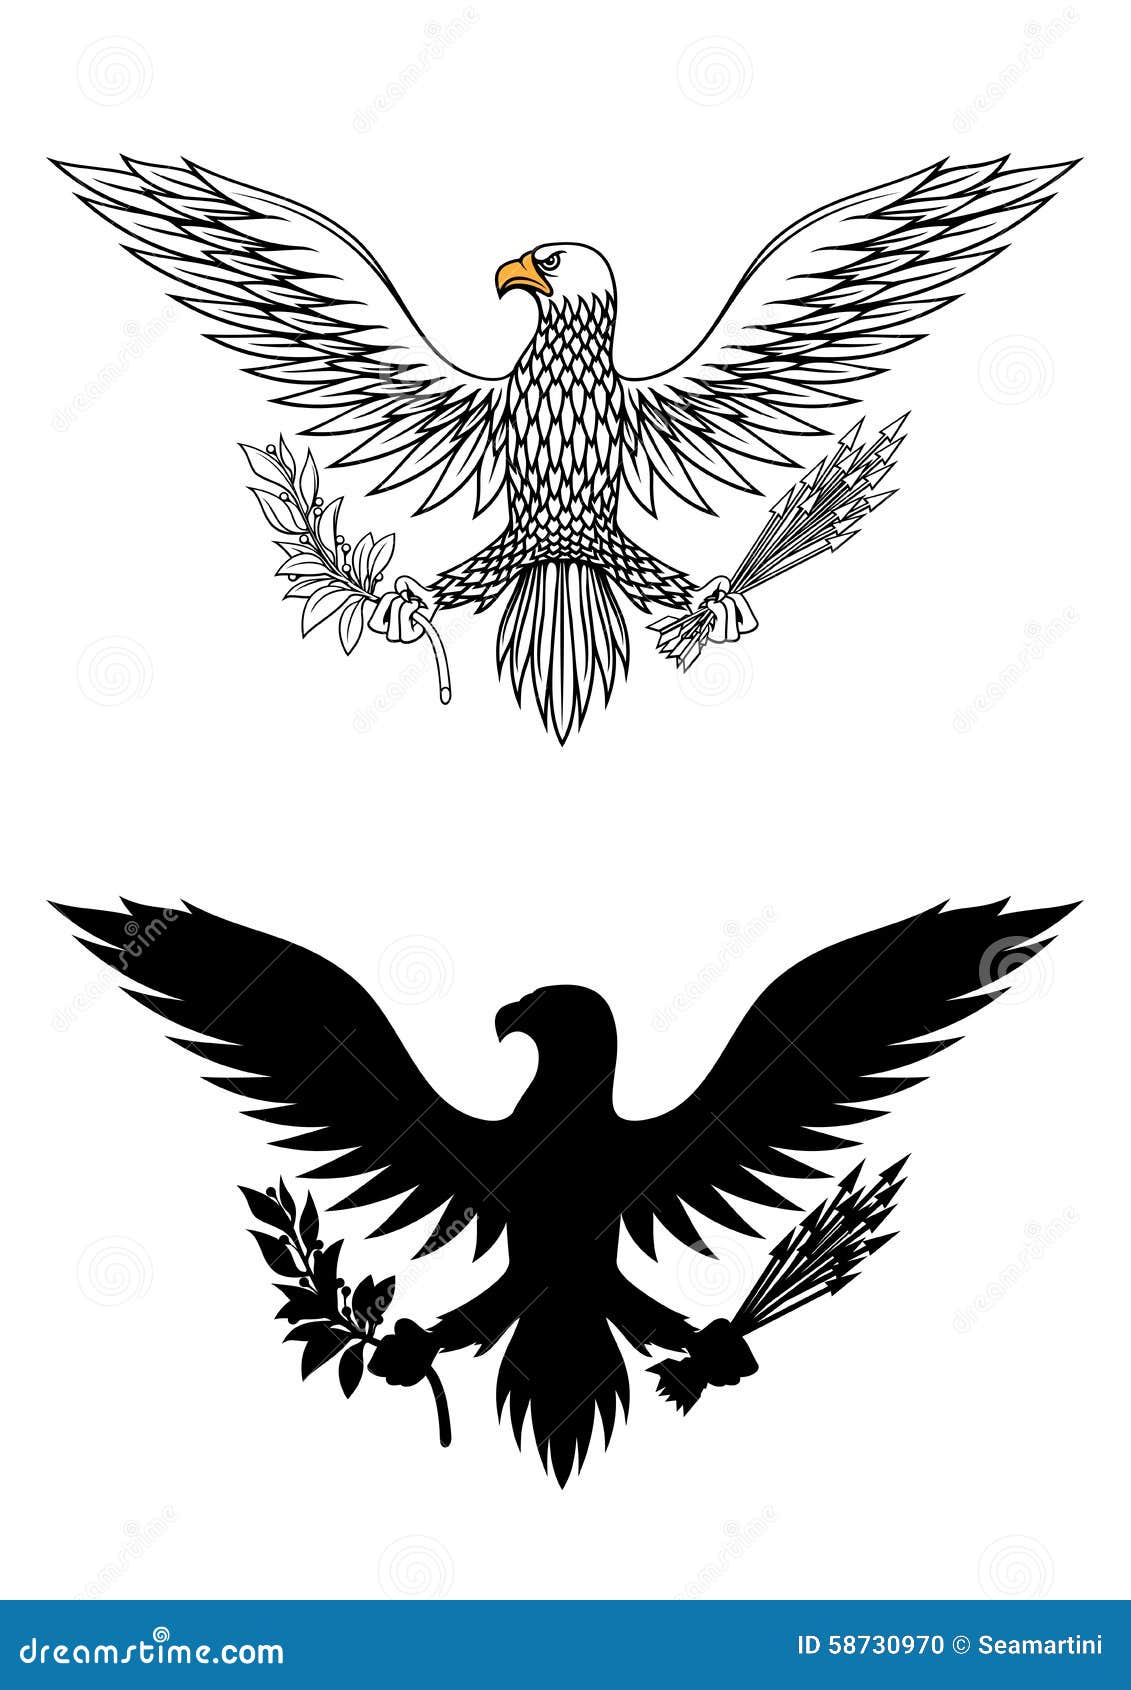 American eagle holding an olive branch and arrows symbolic of war and ...